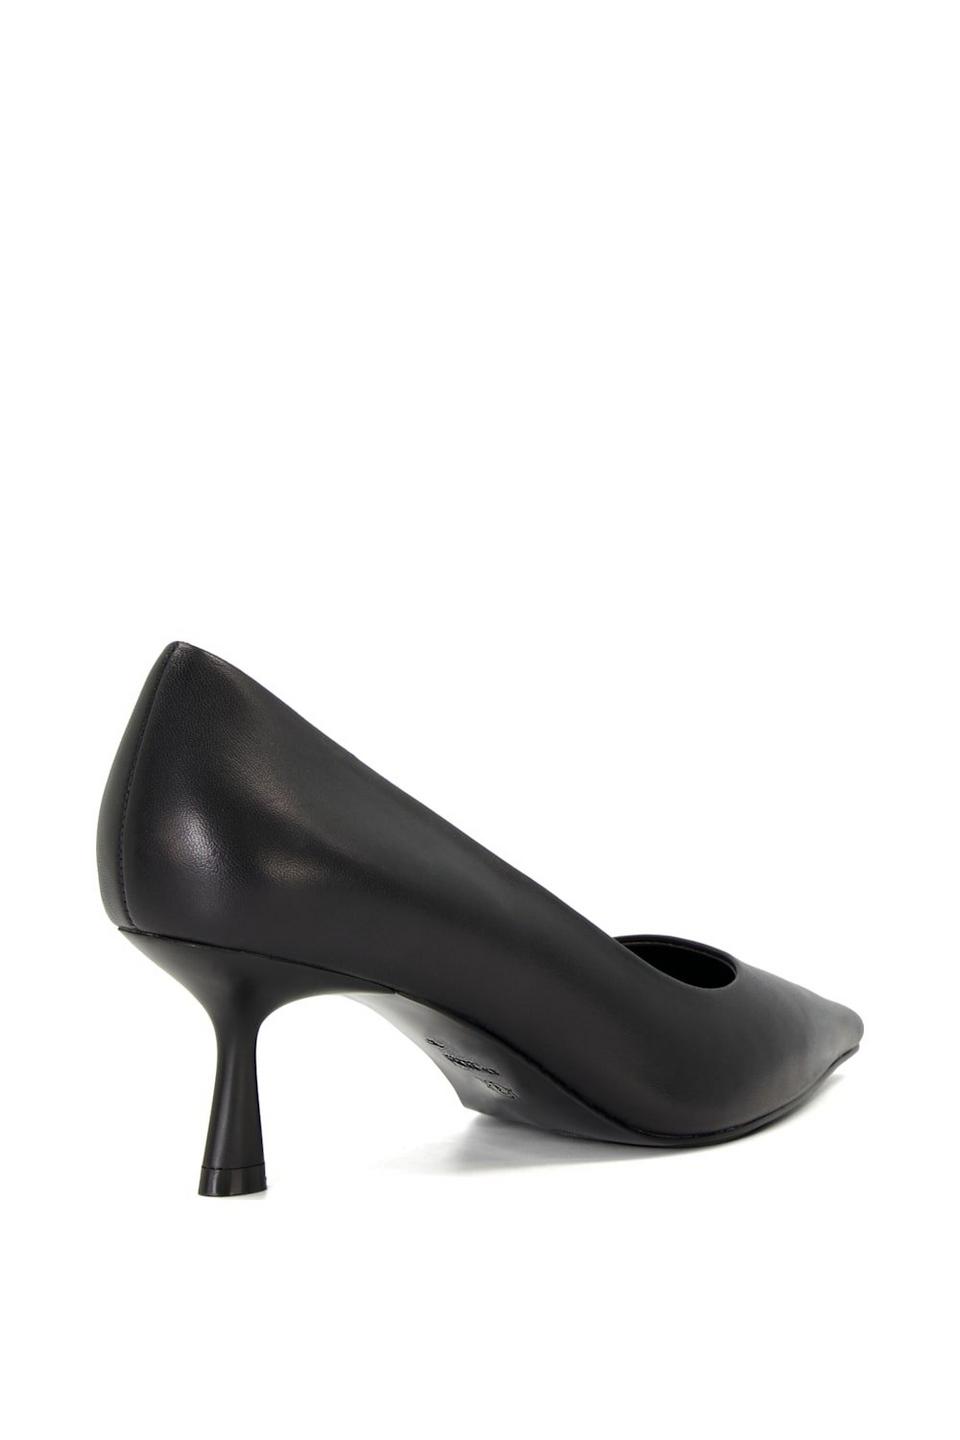 Heels | Wide Fit 'Angelina' Leather Court Shoes | Dune London